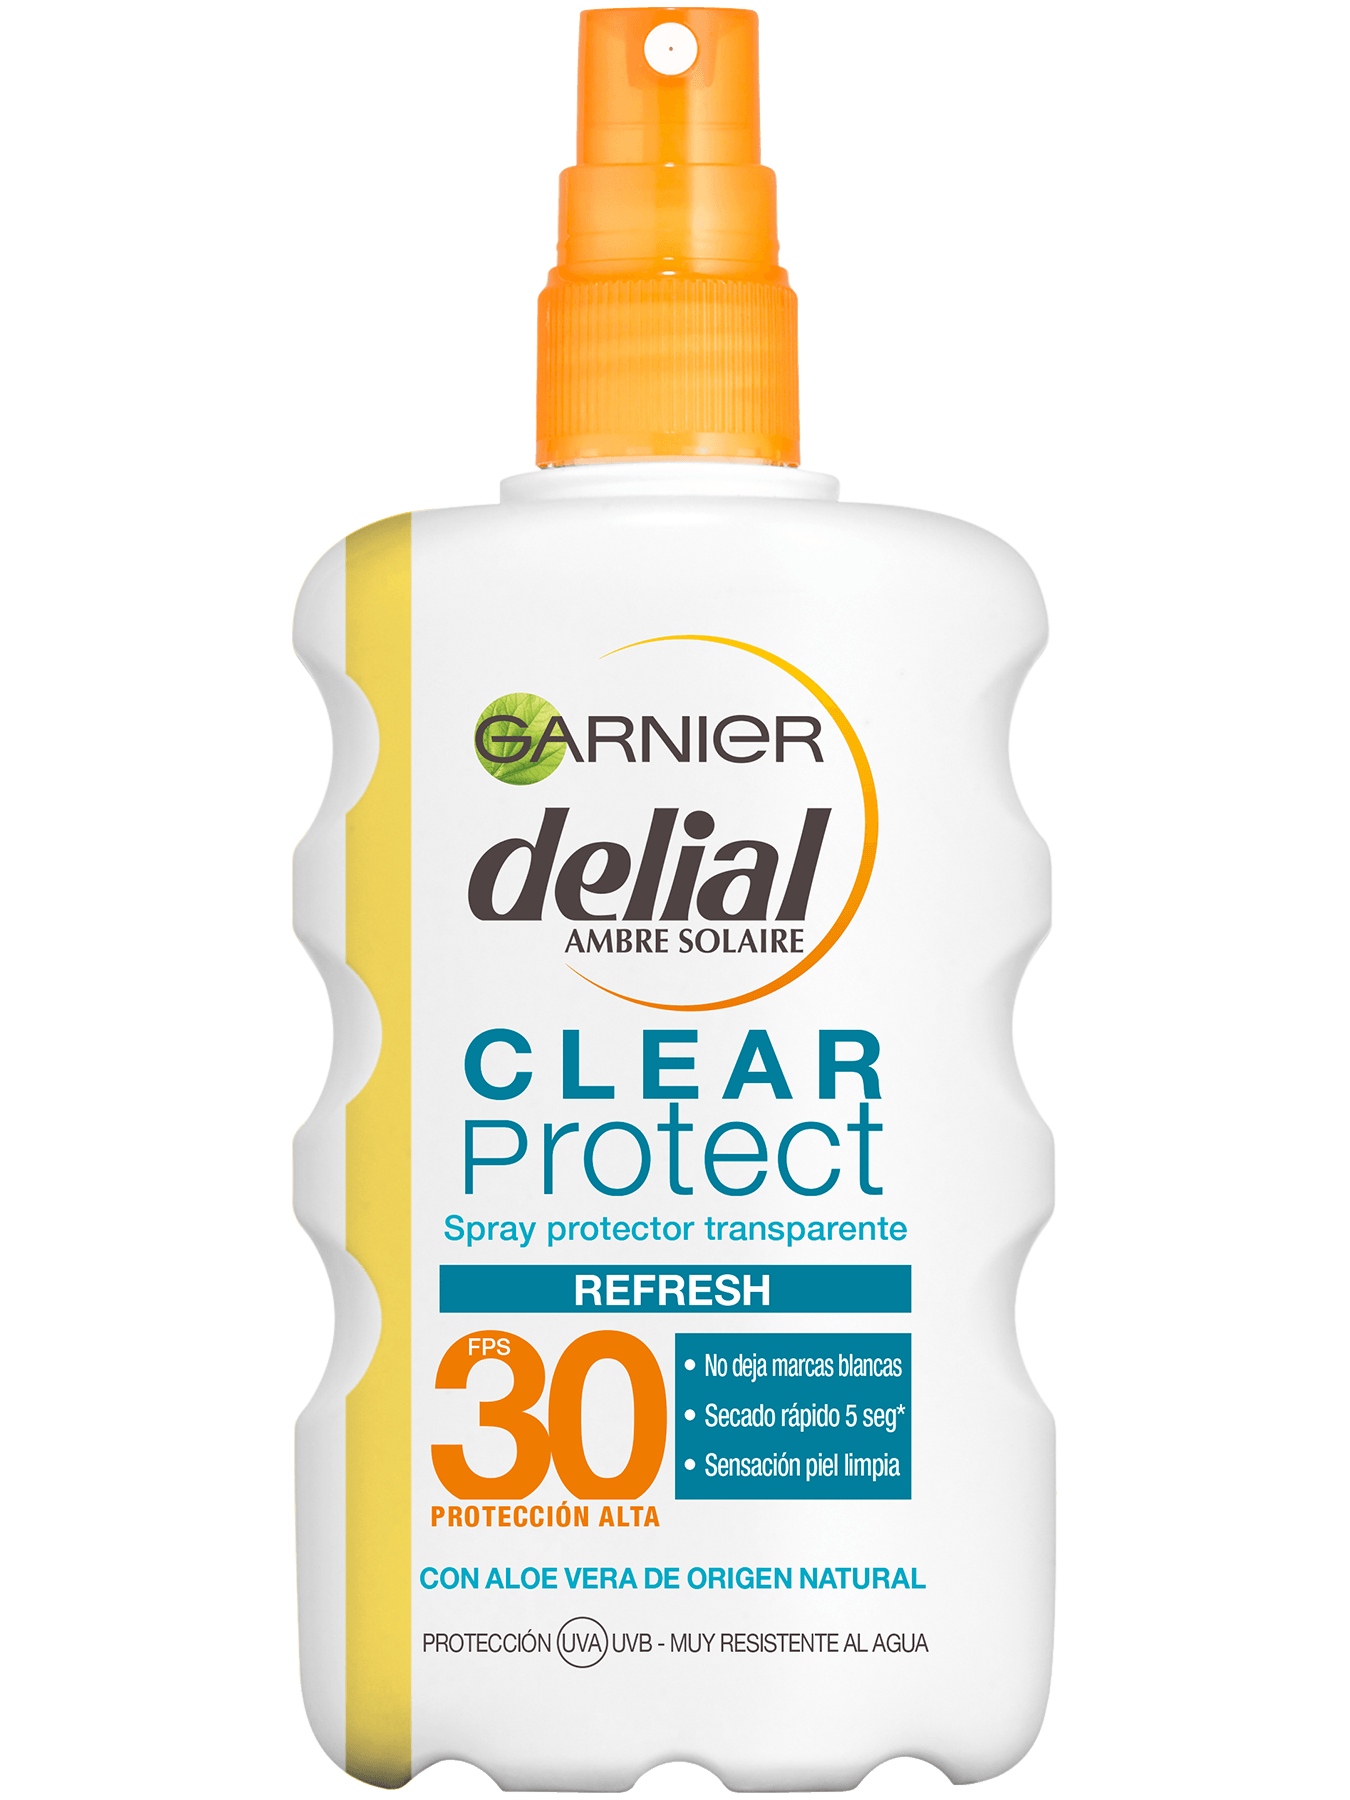 Delial Clear Protect 30 Refresh